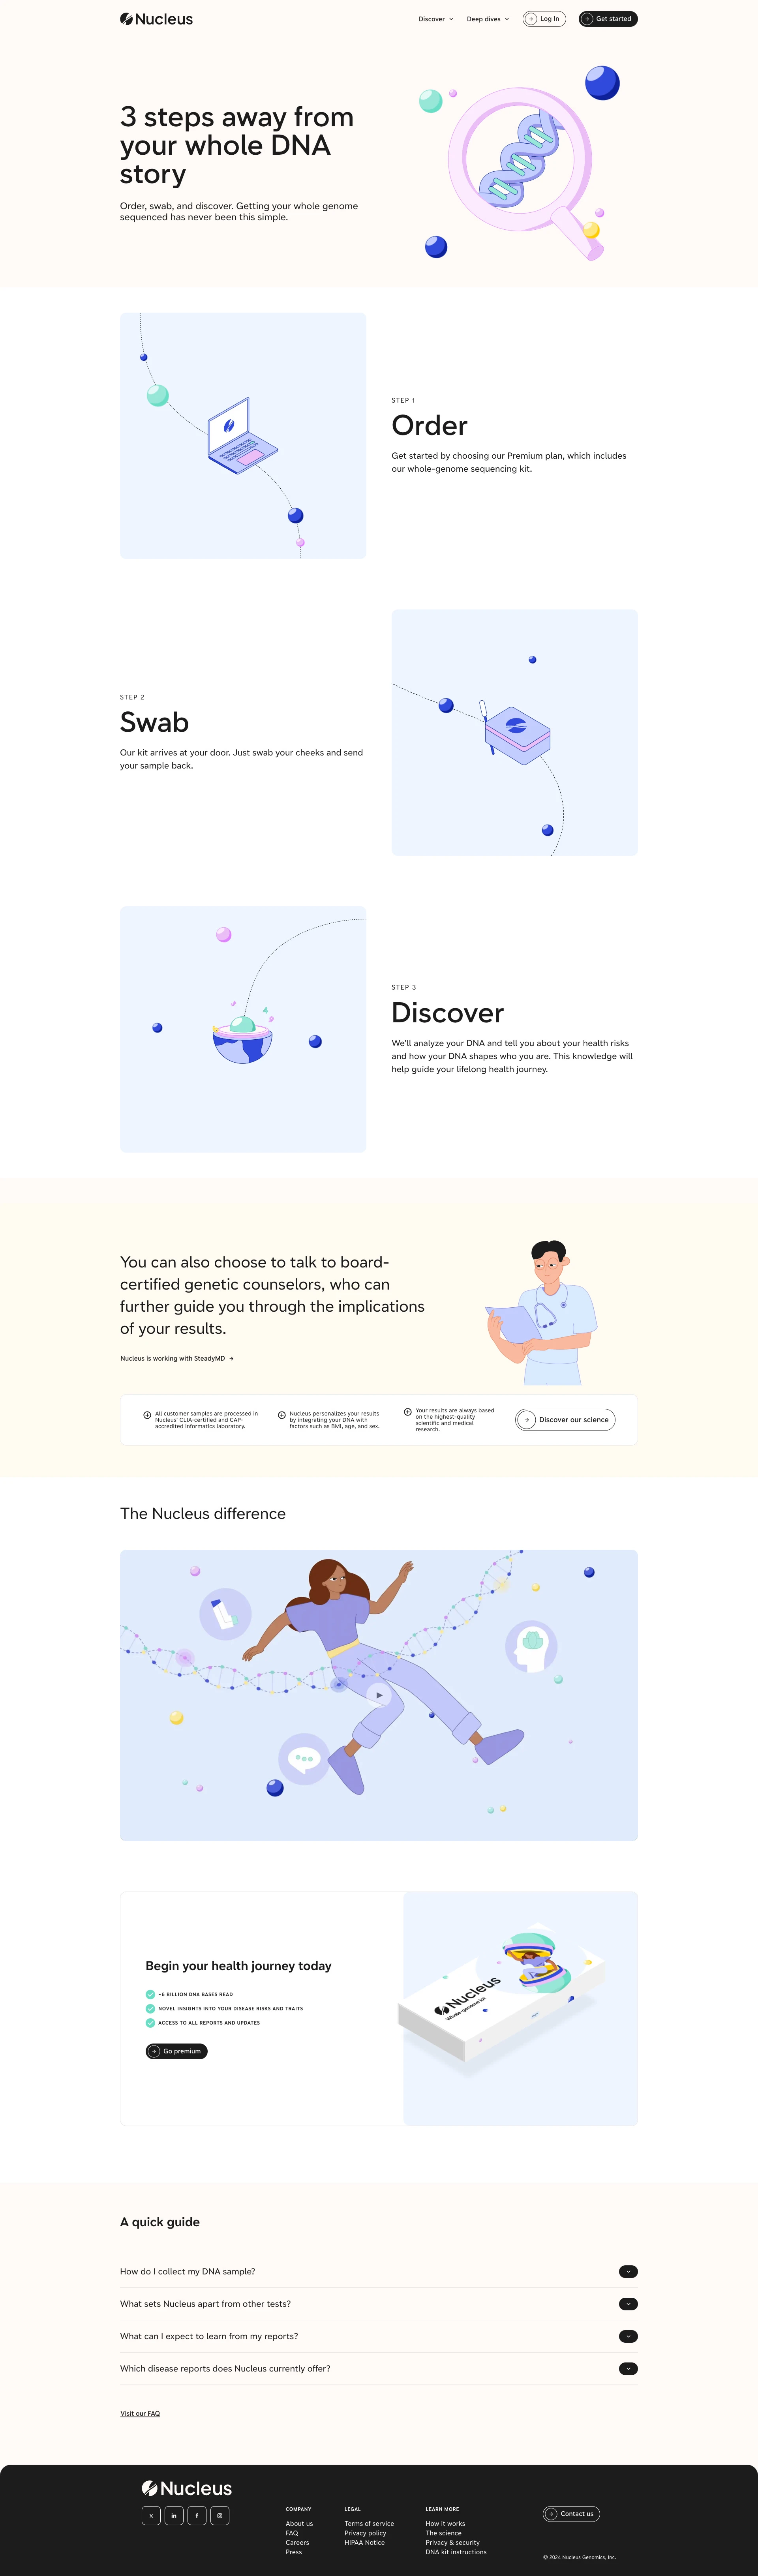 Nucleus Genomics Landing Page Example: Rediscover yourself. Nucleus is a new era of proactive health, delivering insights guided by your unique DNA and lifestyle that inspire your healthiest life.